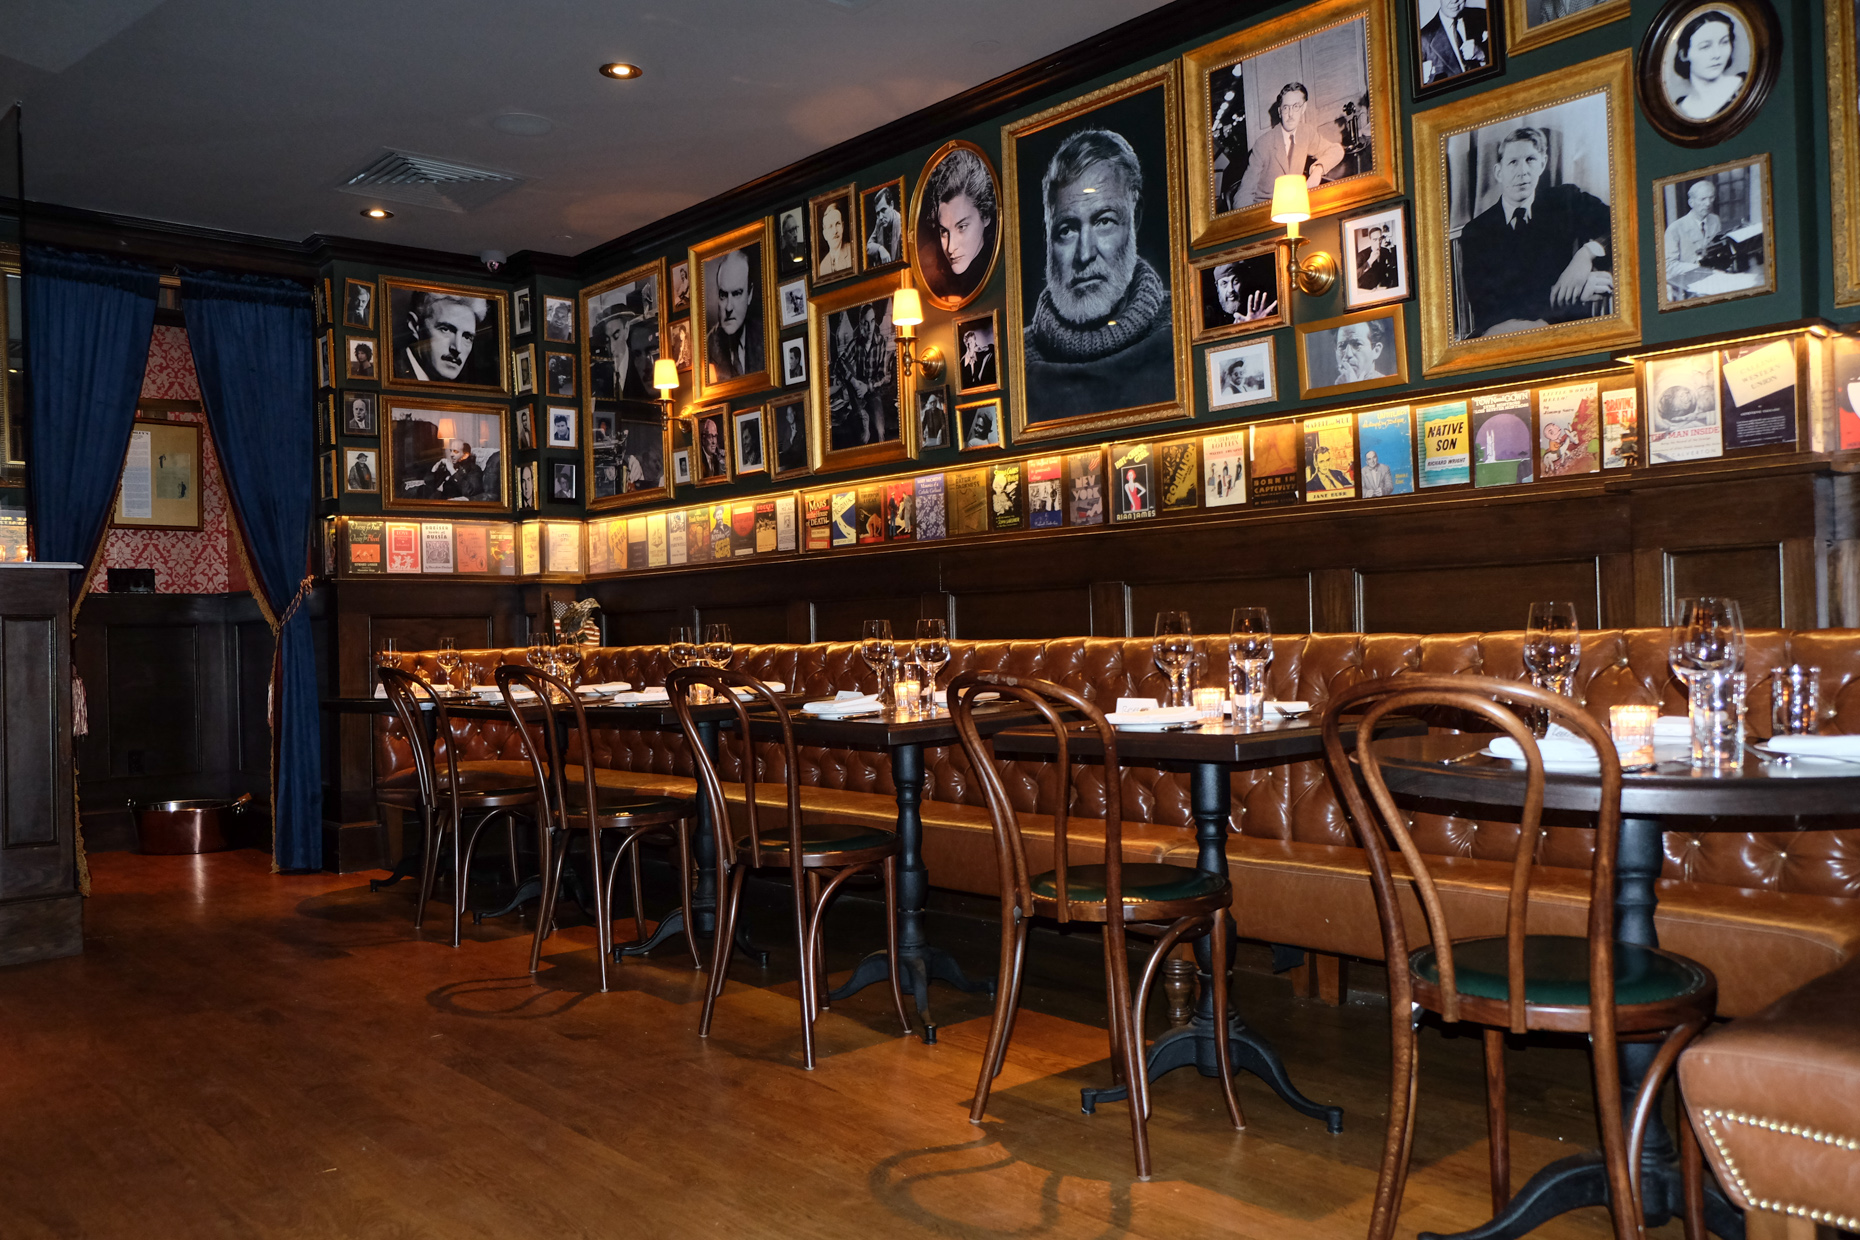 Like the old Chumley's, the rebuilt bar's walls sport authors' book covers and photos of literary legends and other icons.